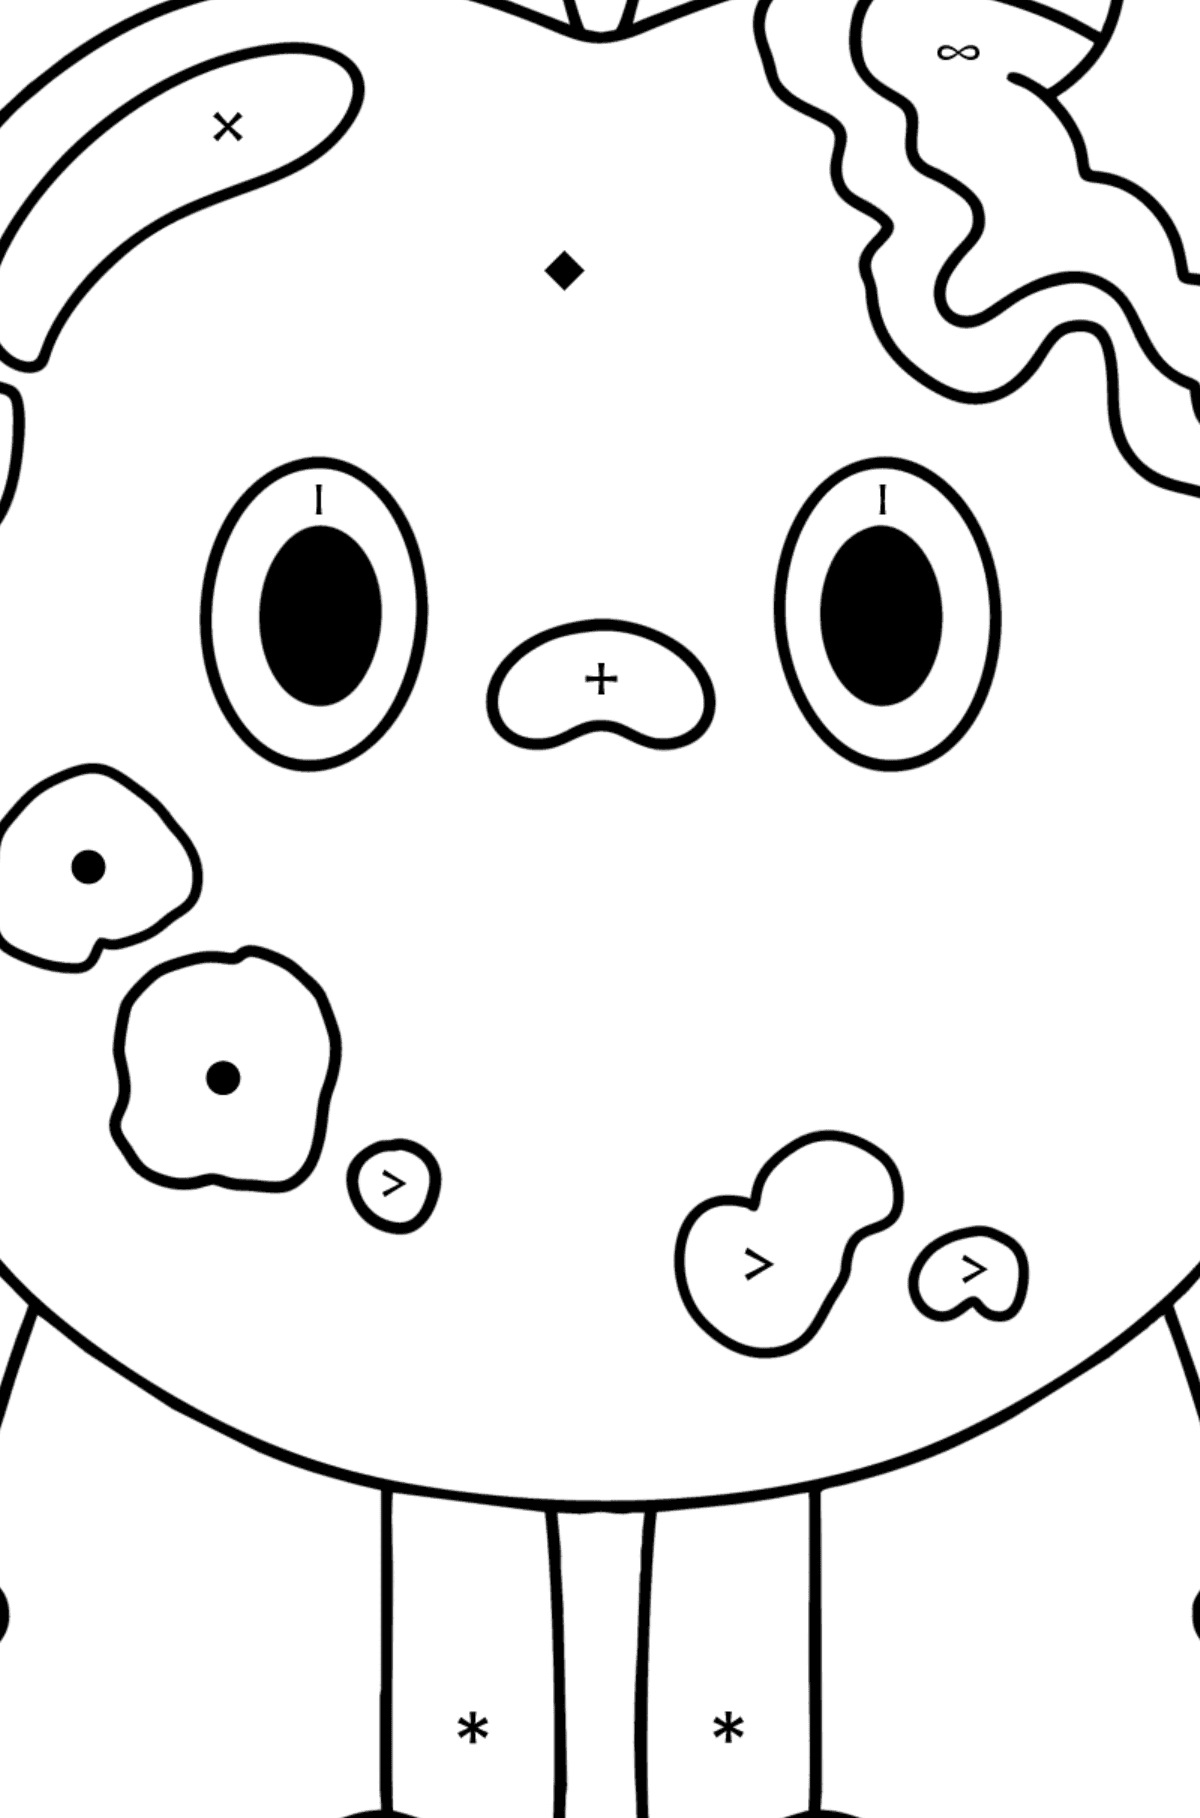 Coloring page Tocaboca heroes 02 - Coloring by Symbols for Kids